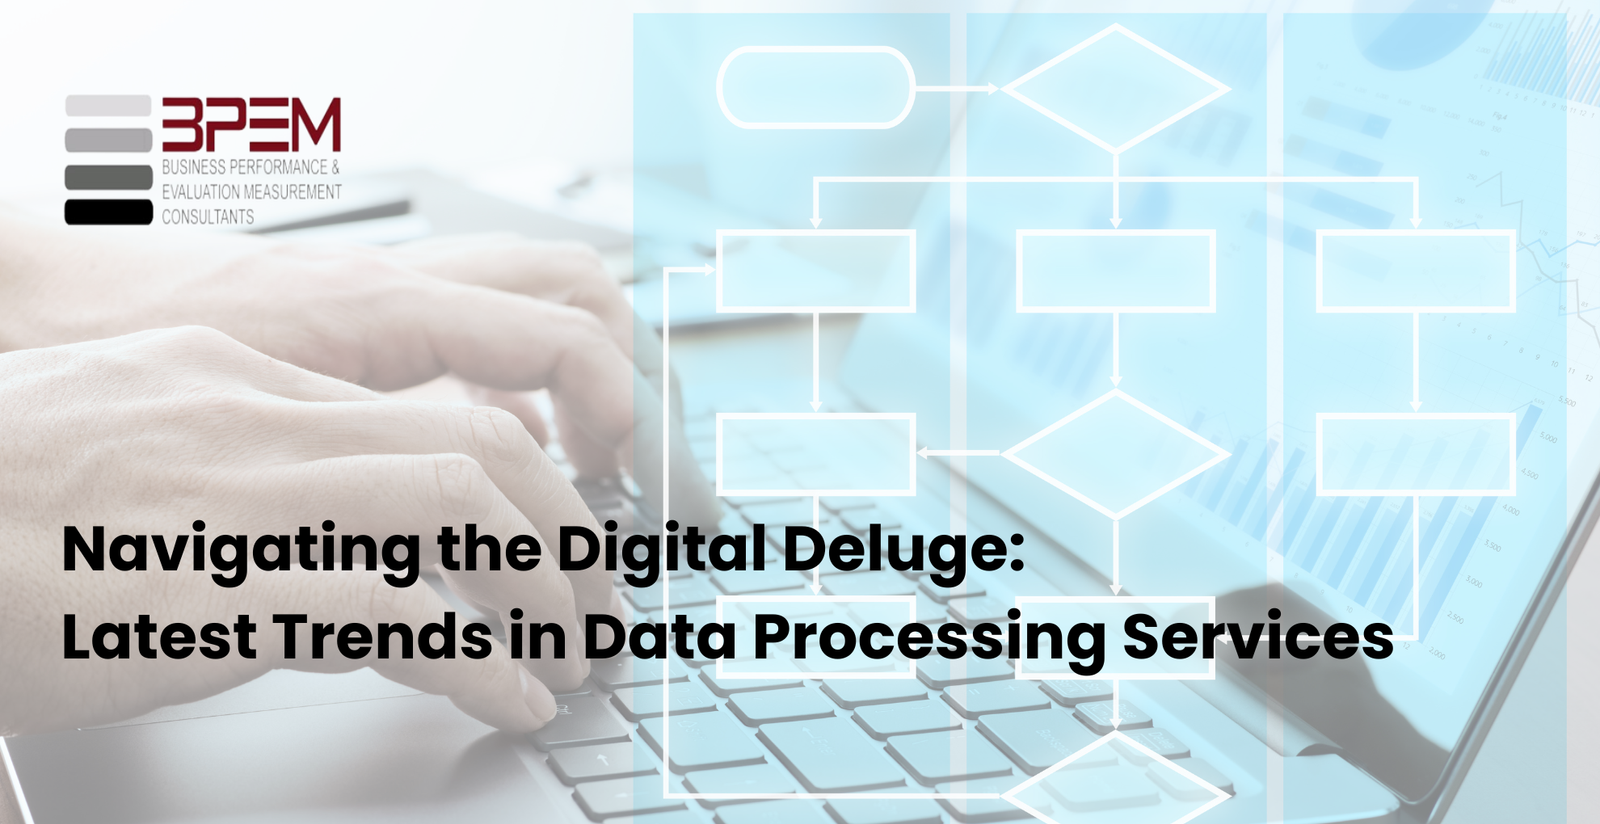 What is Data Processing Services